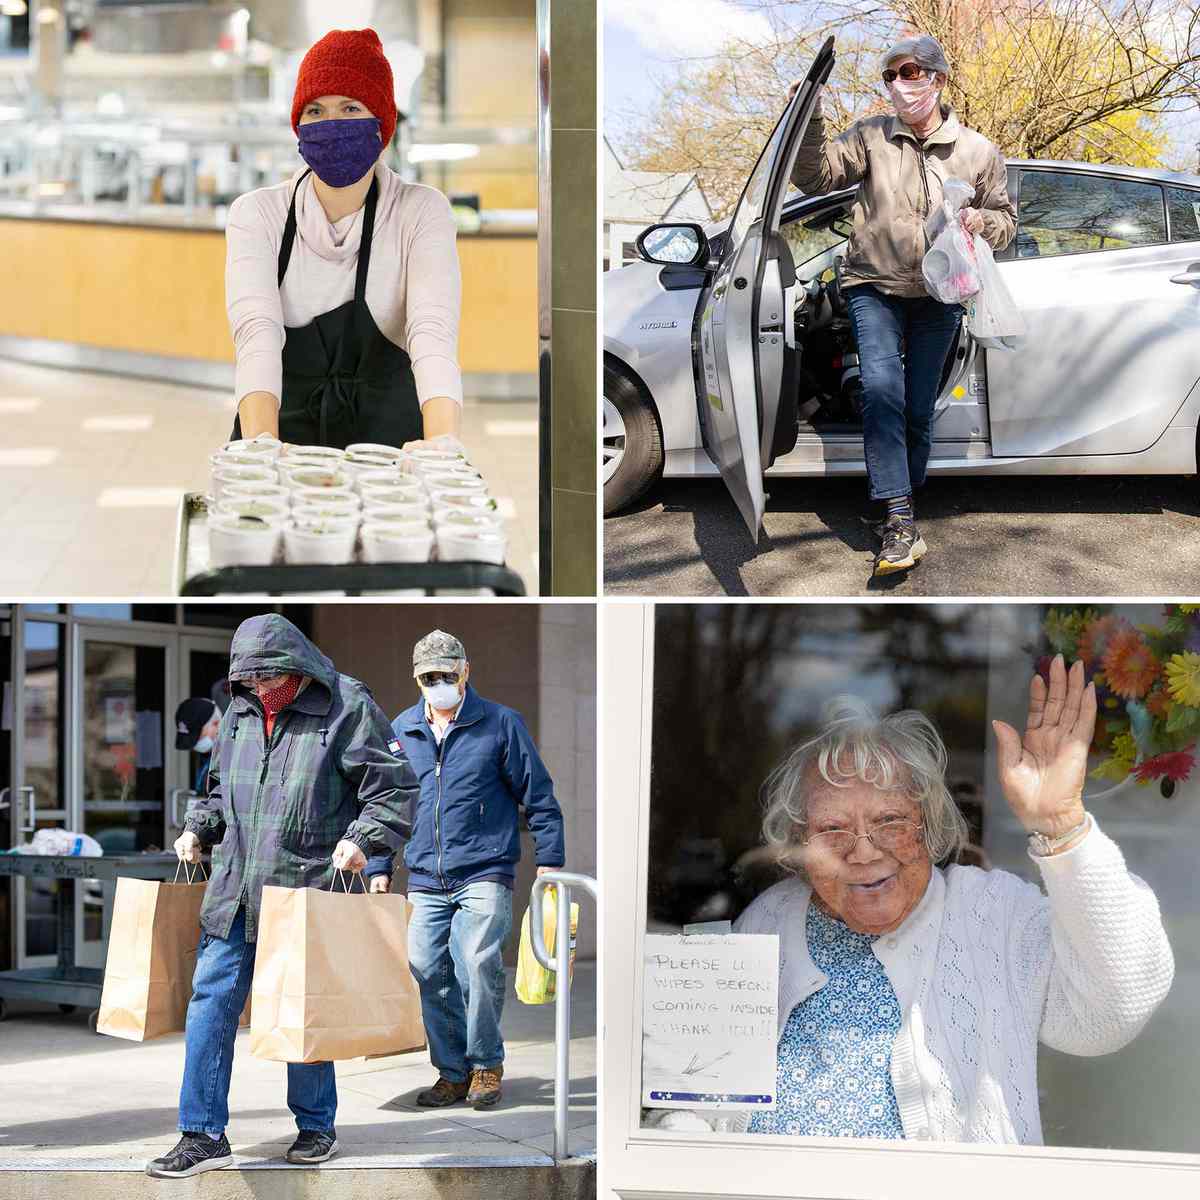 Grid of four photos showing volunteers for Meals on Wheels America